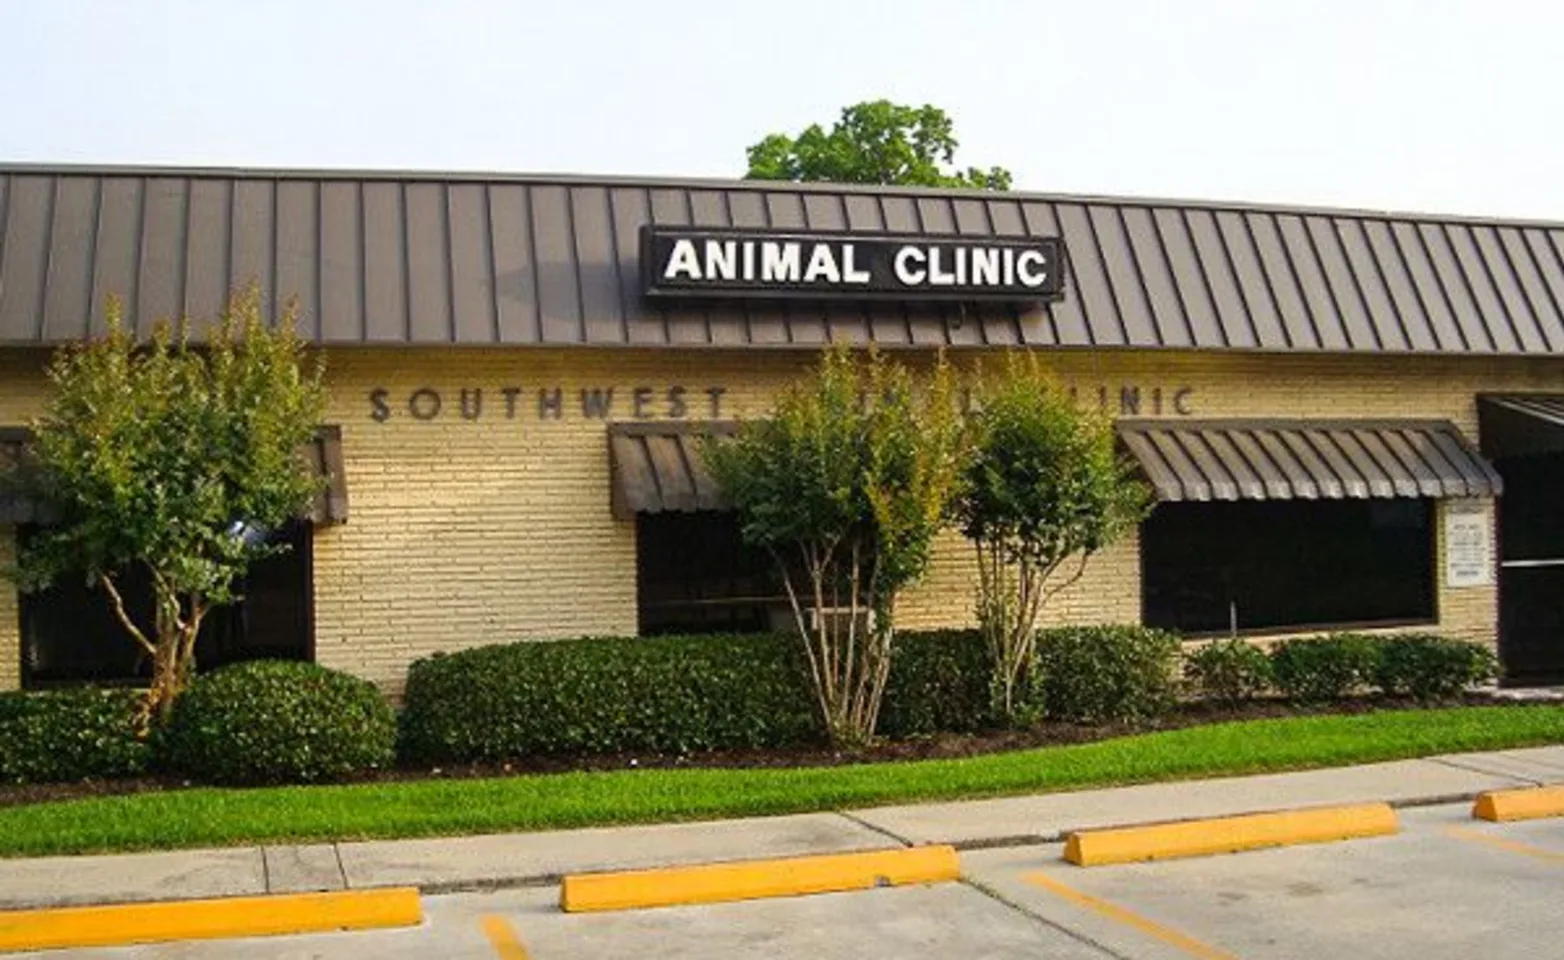 Exterior view of a veterinary clinic